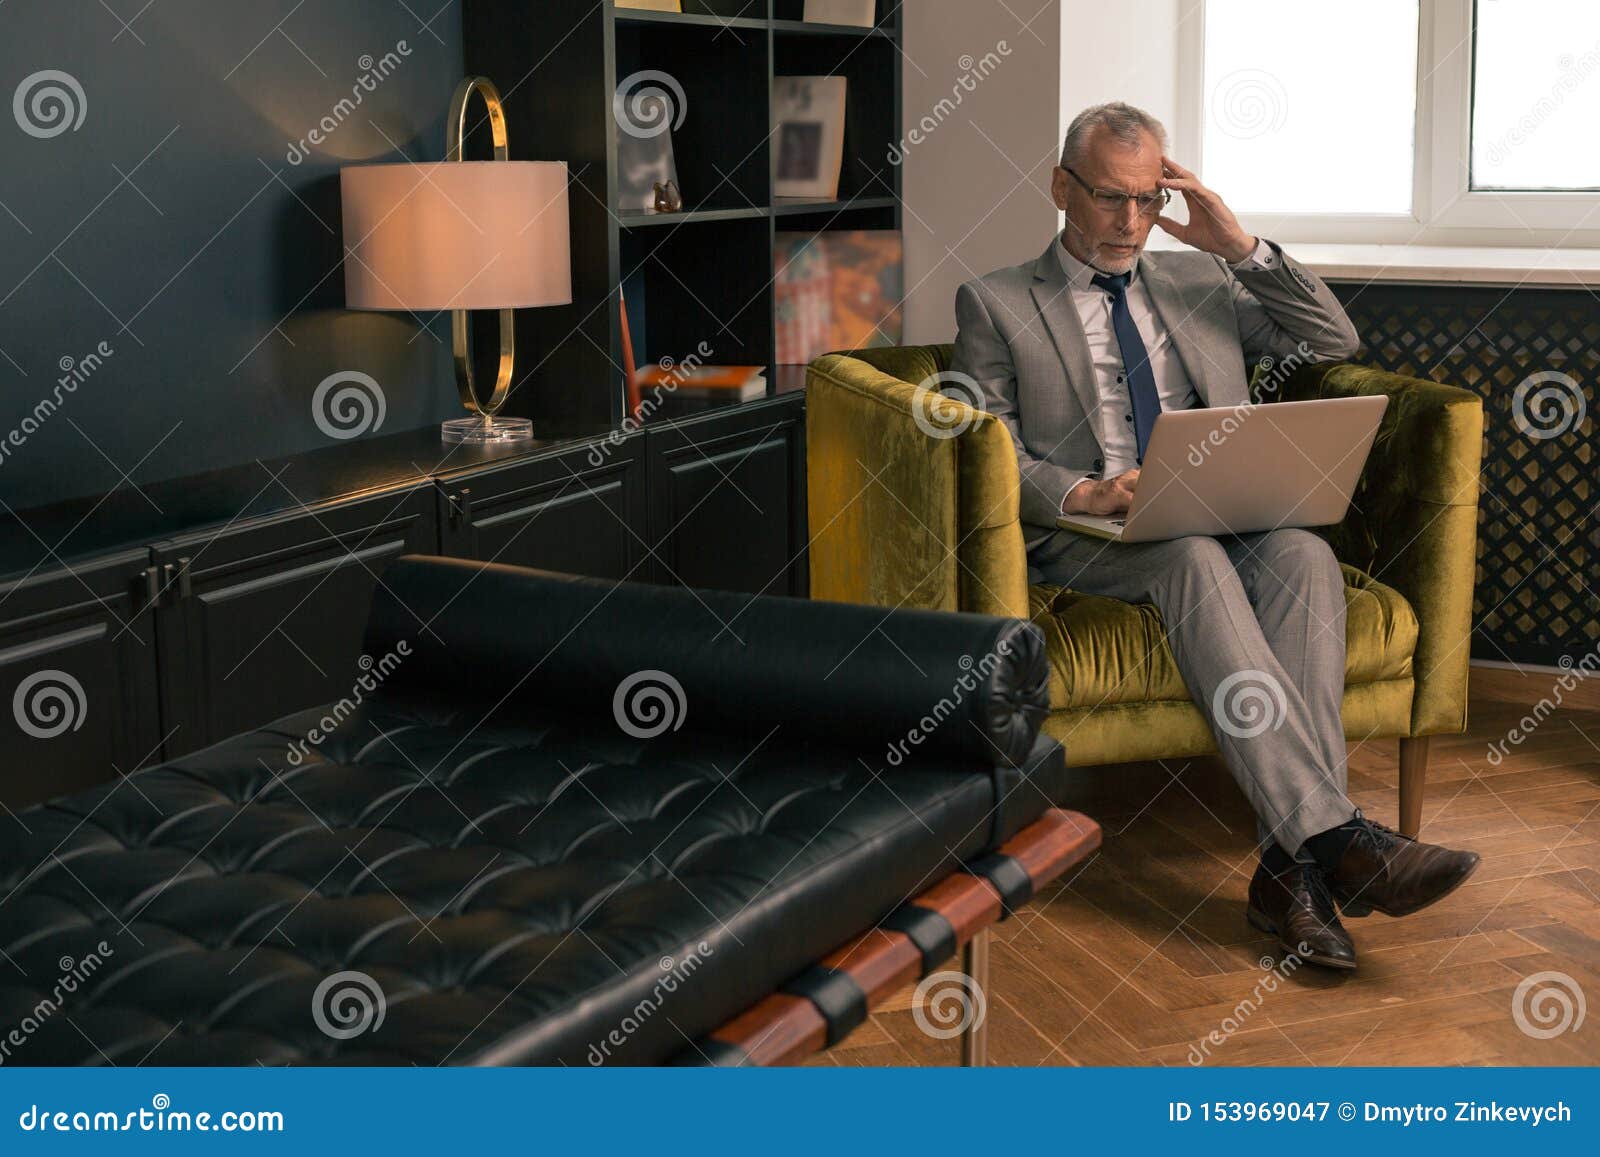 Concentrated Serious Gray Haired Man Sitting In An Armchair Stock Image Image Of Couch